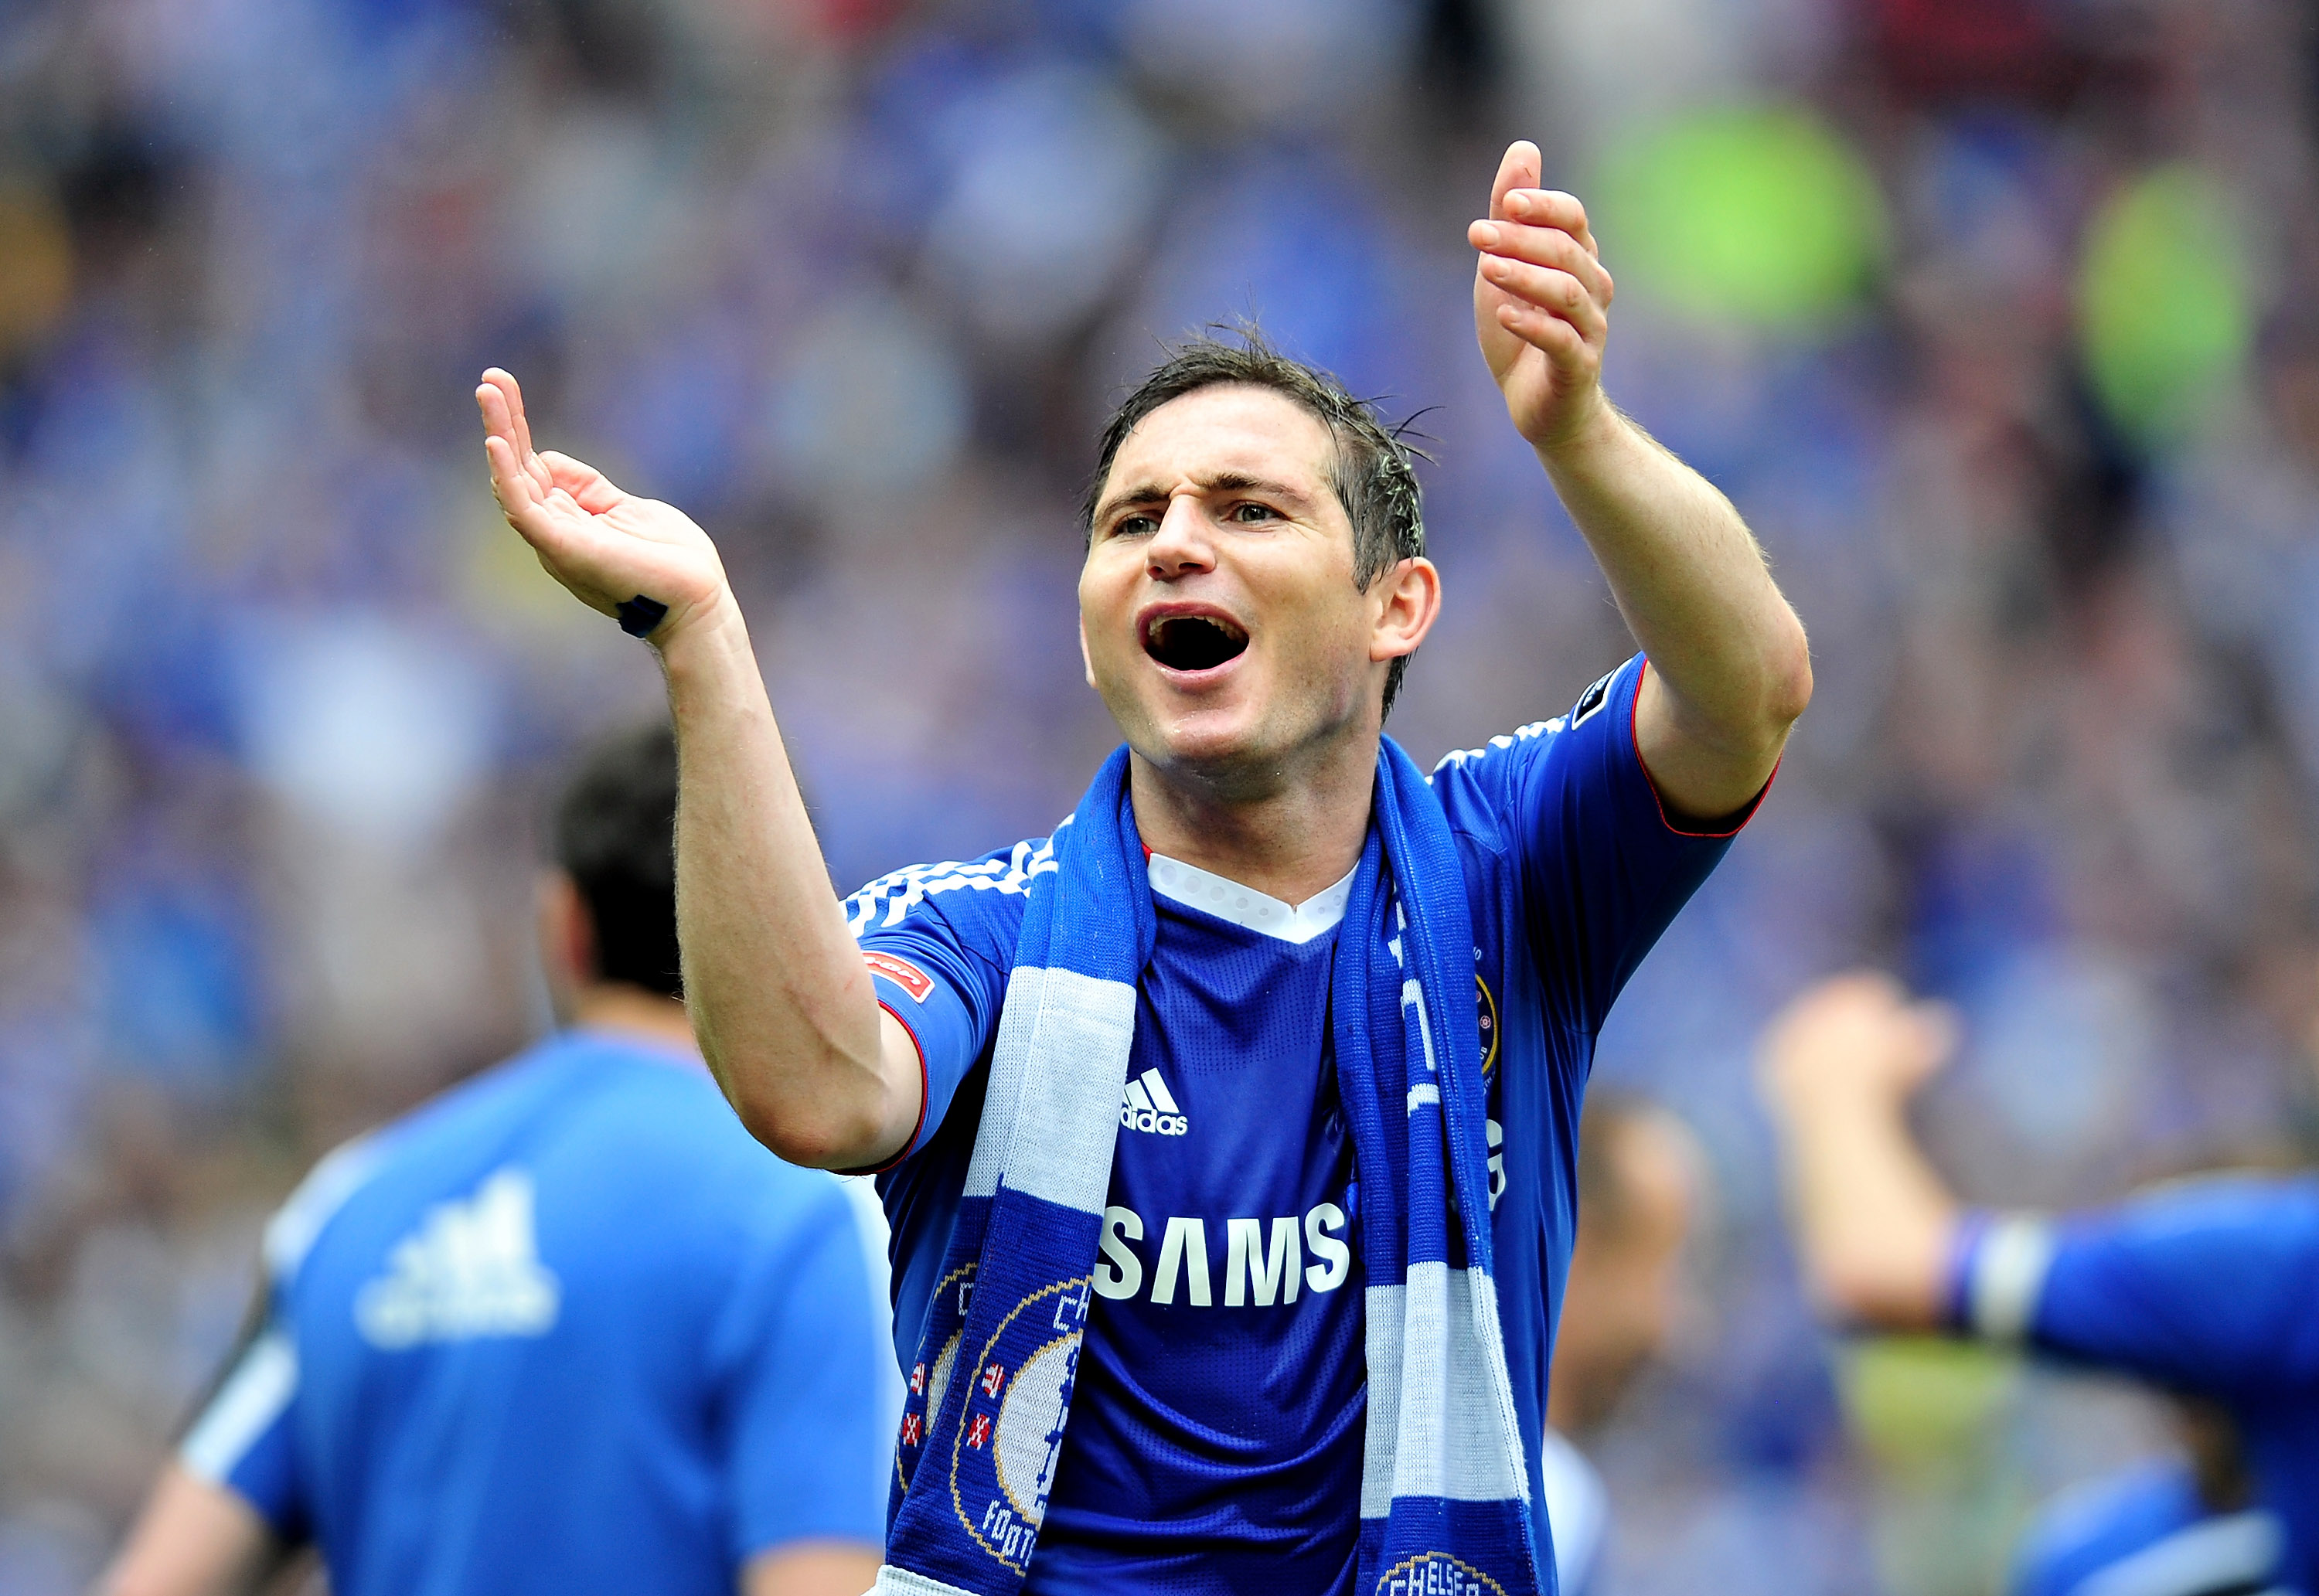 LONDON, ENGLAND - MAY 15:  Frank Lampard of Chelsea celebrates at the end of the FA Cup sponsored by E.ON Final match between Chelsea and Portsmouth at Wembley Stadium on May 15, 2010 in London, England. (Photo by Clive Mason/Getty Images)